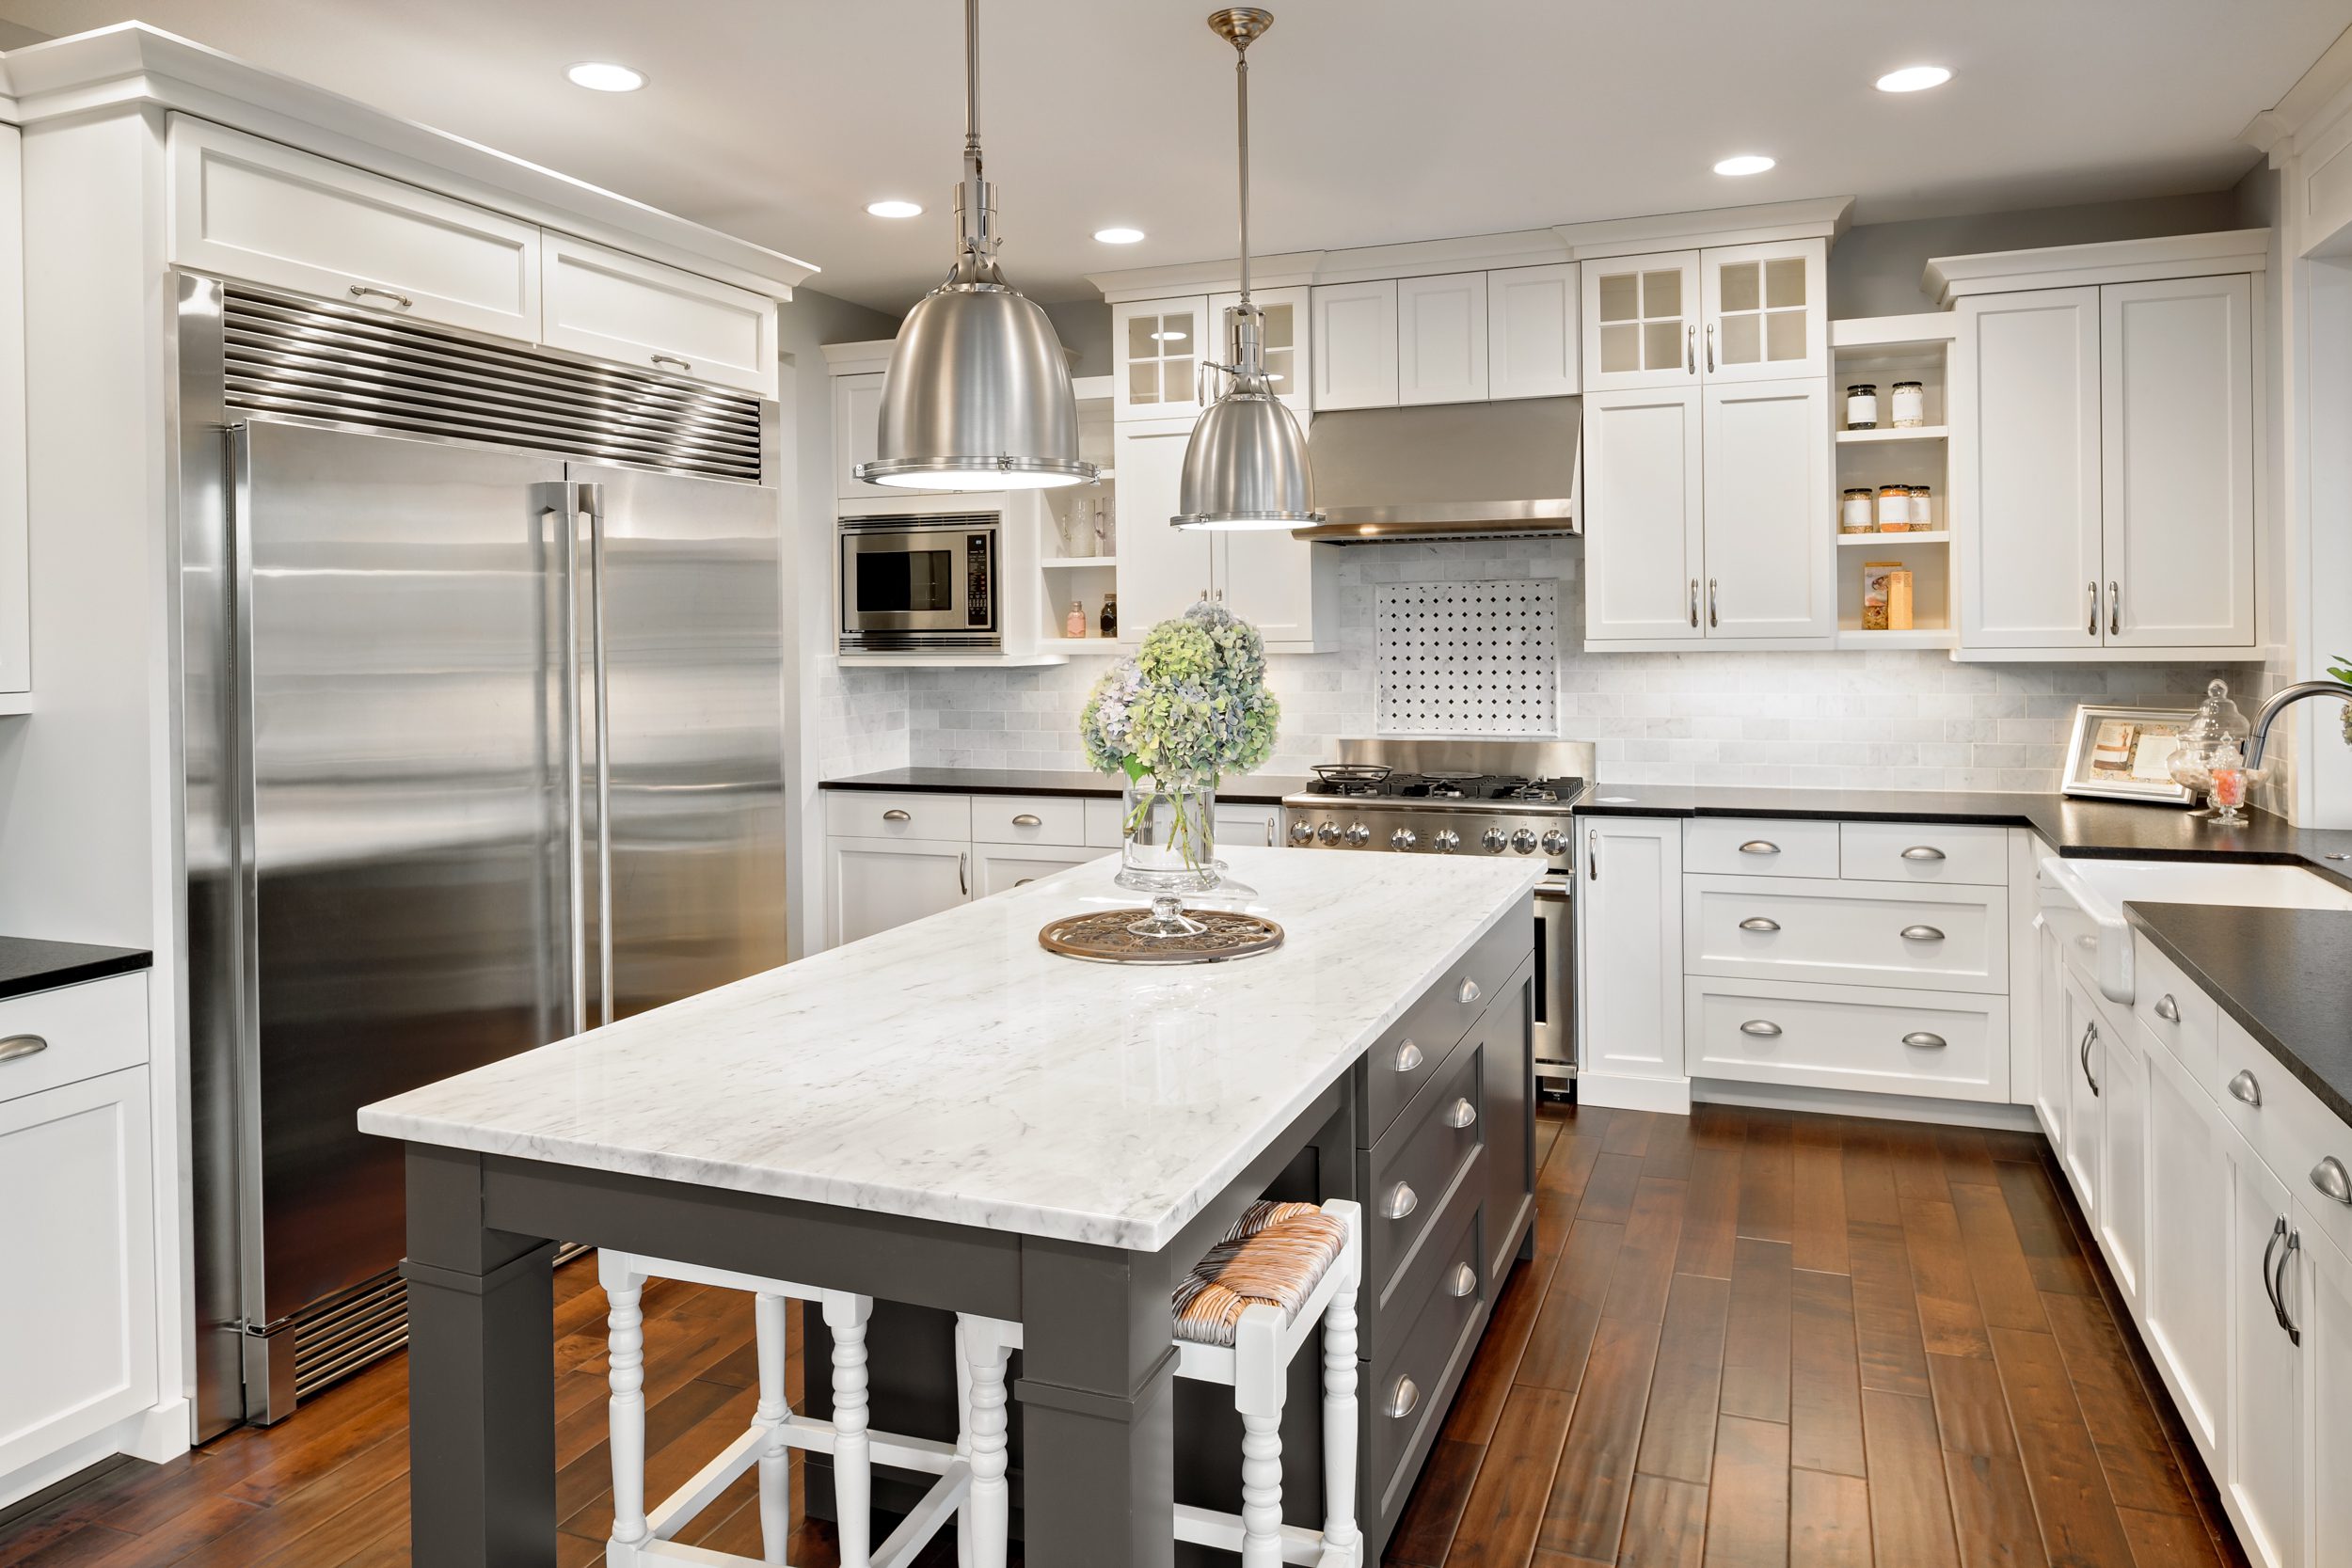 remodel, renovation, kitchen, kitchen renovation, kitchen remodel, new kitchen, kitchen upgrades, floor to ceiling cabinets, two tone cabinets, double kitchen island, built in coffee station, Seamless backsplash and countertops, kitchen trends